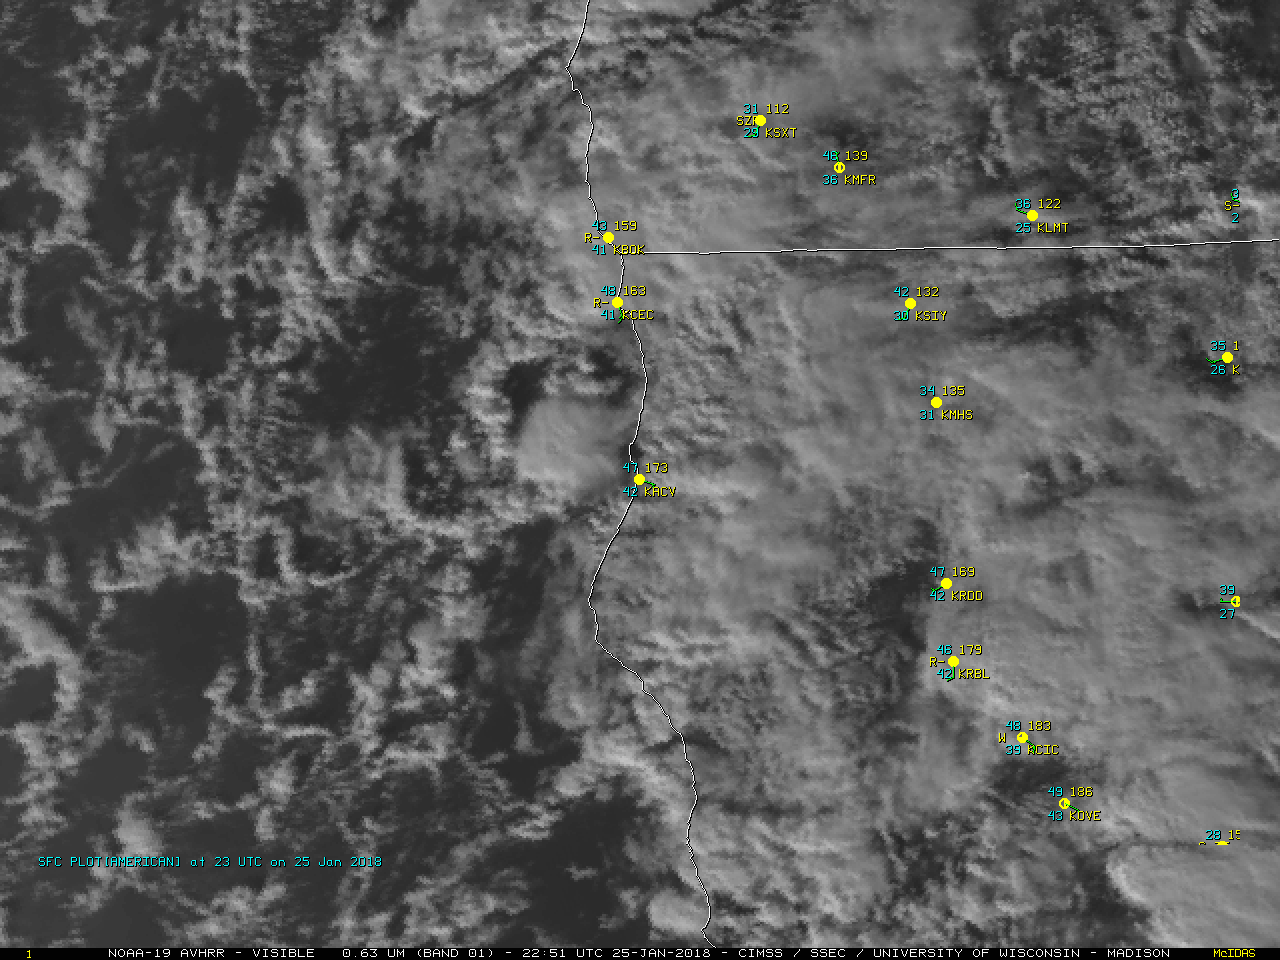 NOAA-19 and GOES-16 Visible images at 2252 UTC, with plots of 23 UTC surface reports [click to enlarge]